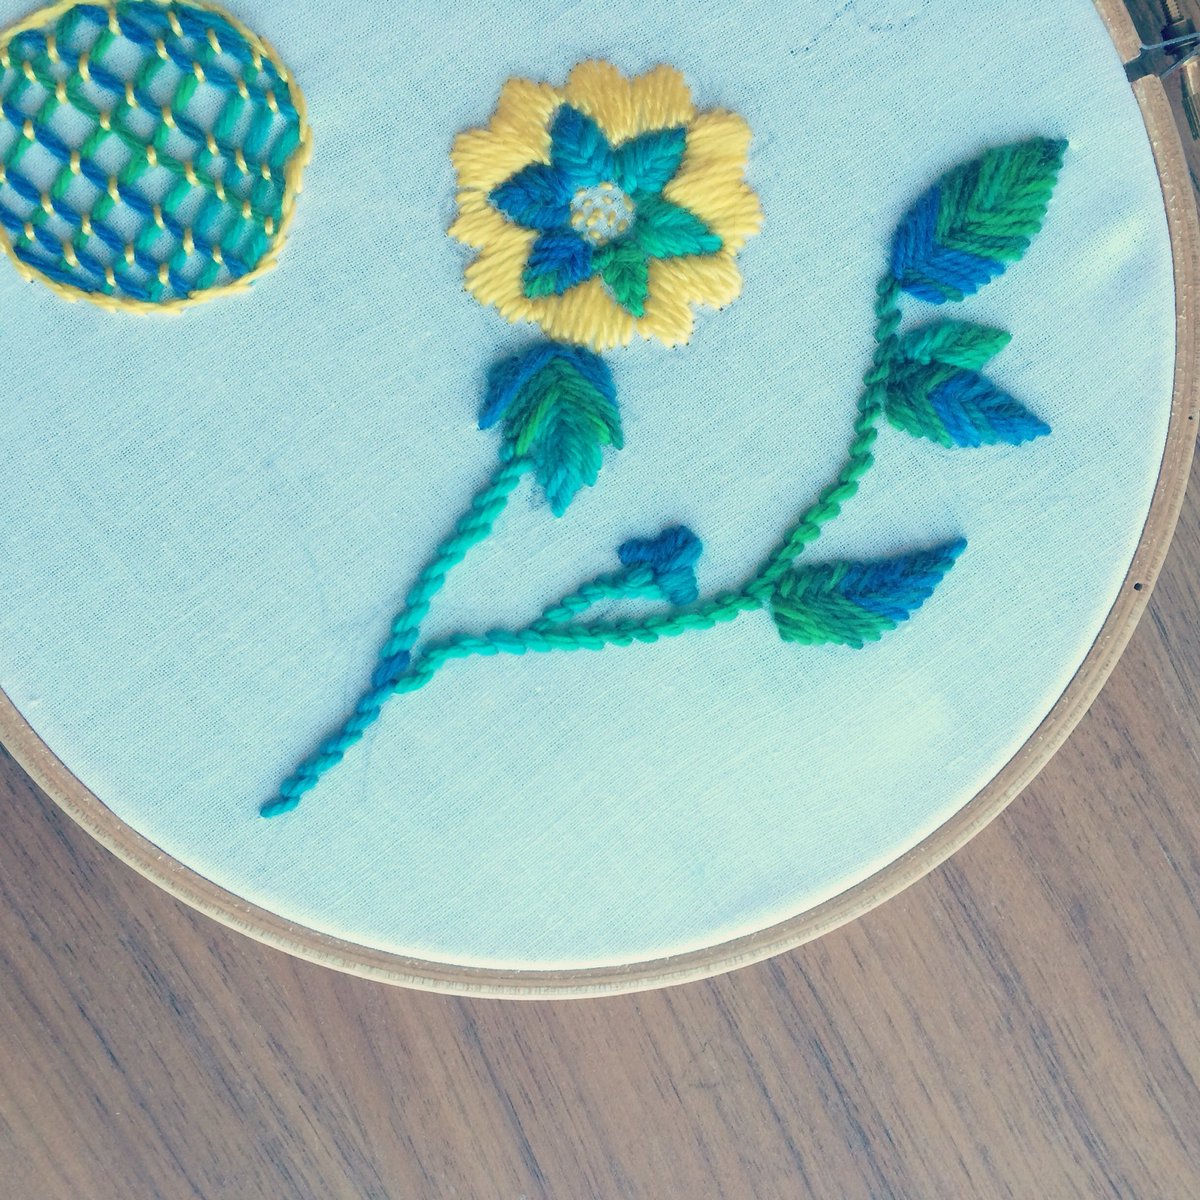 Front                                             #wip #embroidery #crewelembroidery #illustration